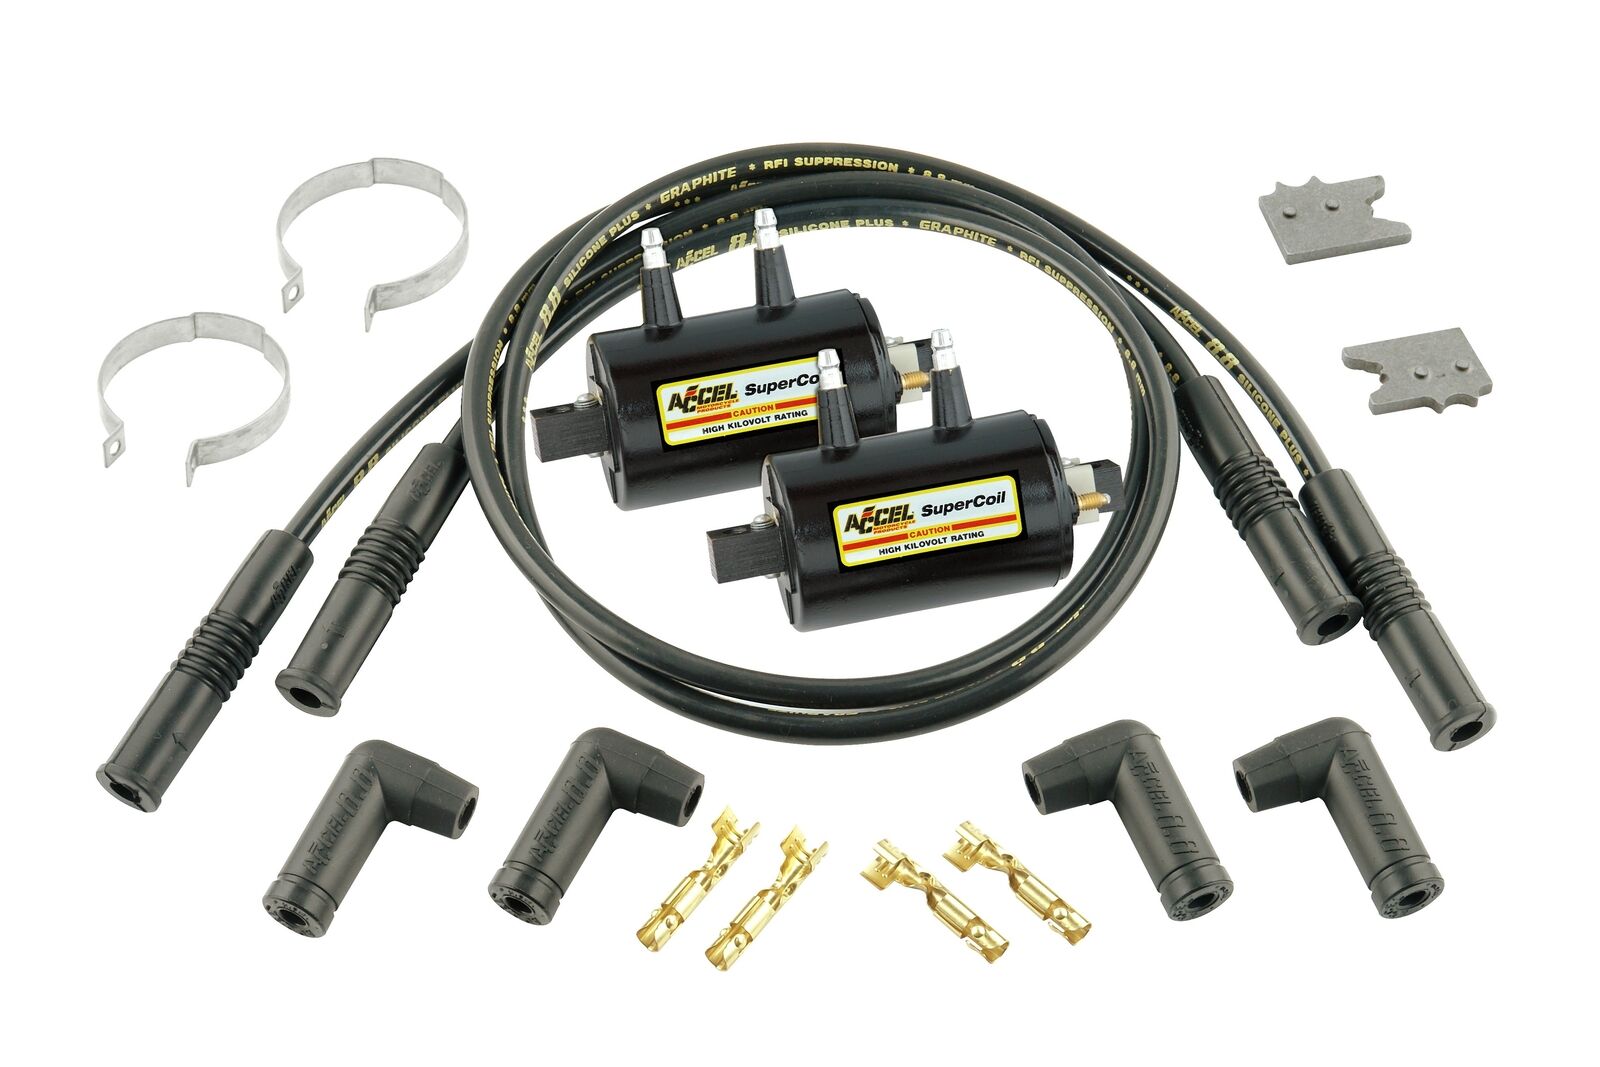 ACCEL Motorcycle 140403K Ignition Coil Kit - Universal Super Coil - 4-Cylinde...